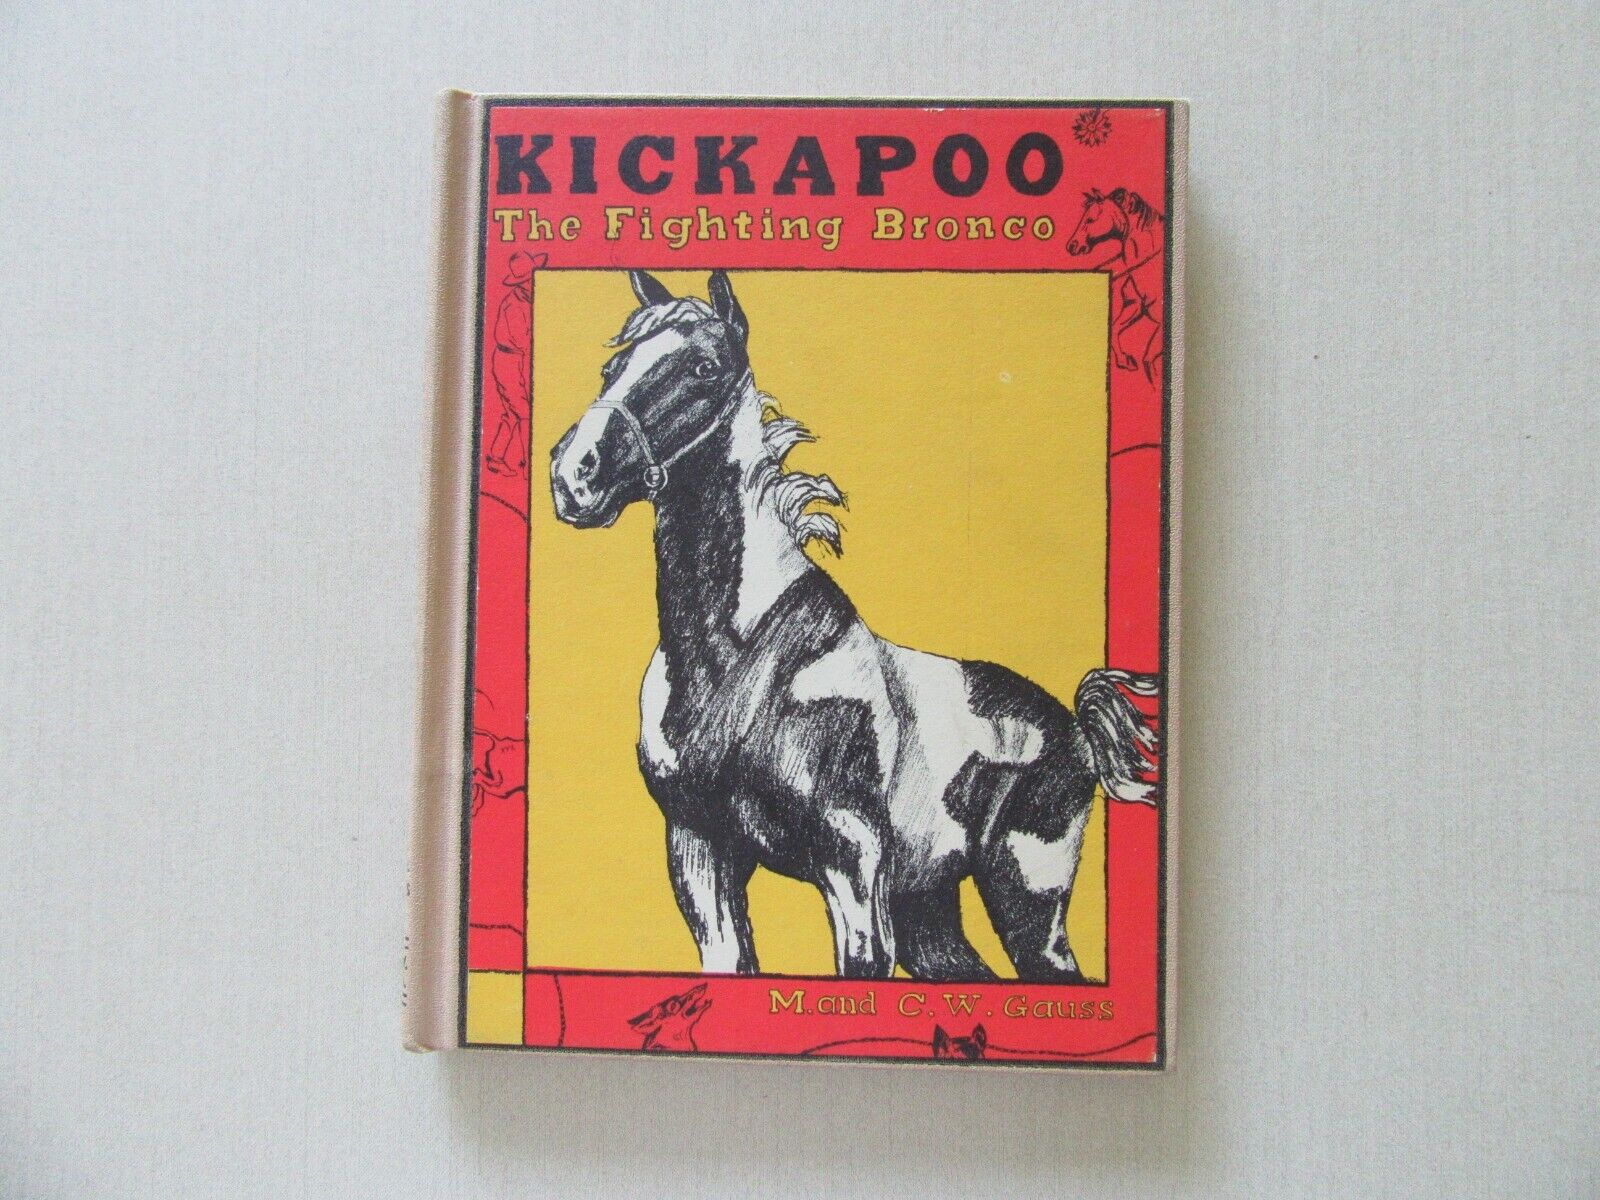 Kickapoo The Fighting Bronco by M & C.W. Gauss - Signed by Both Authors, 1938